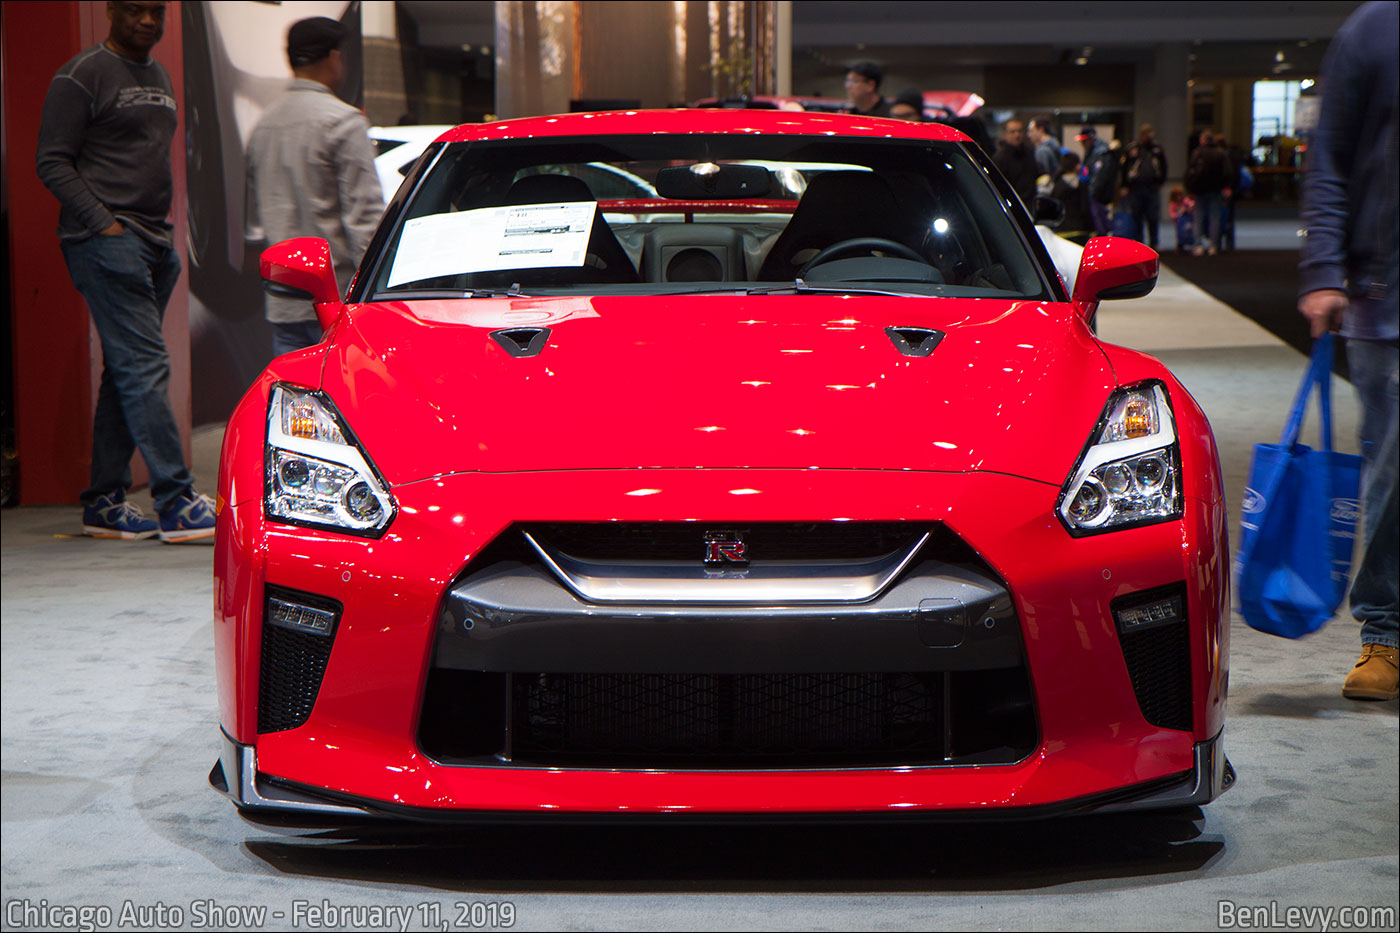 Front of R35 Nissan Skyline